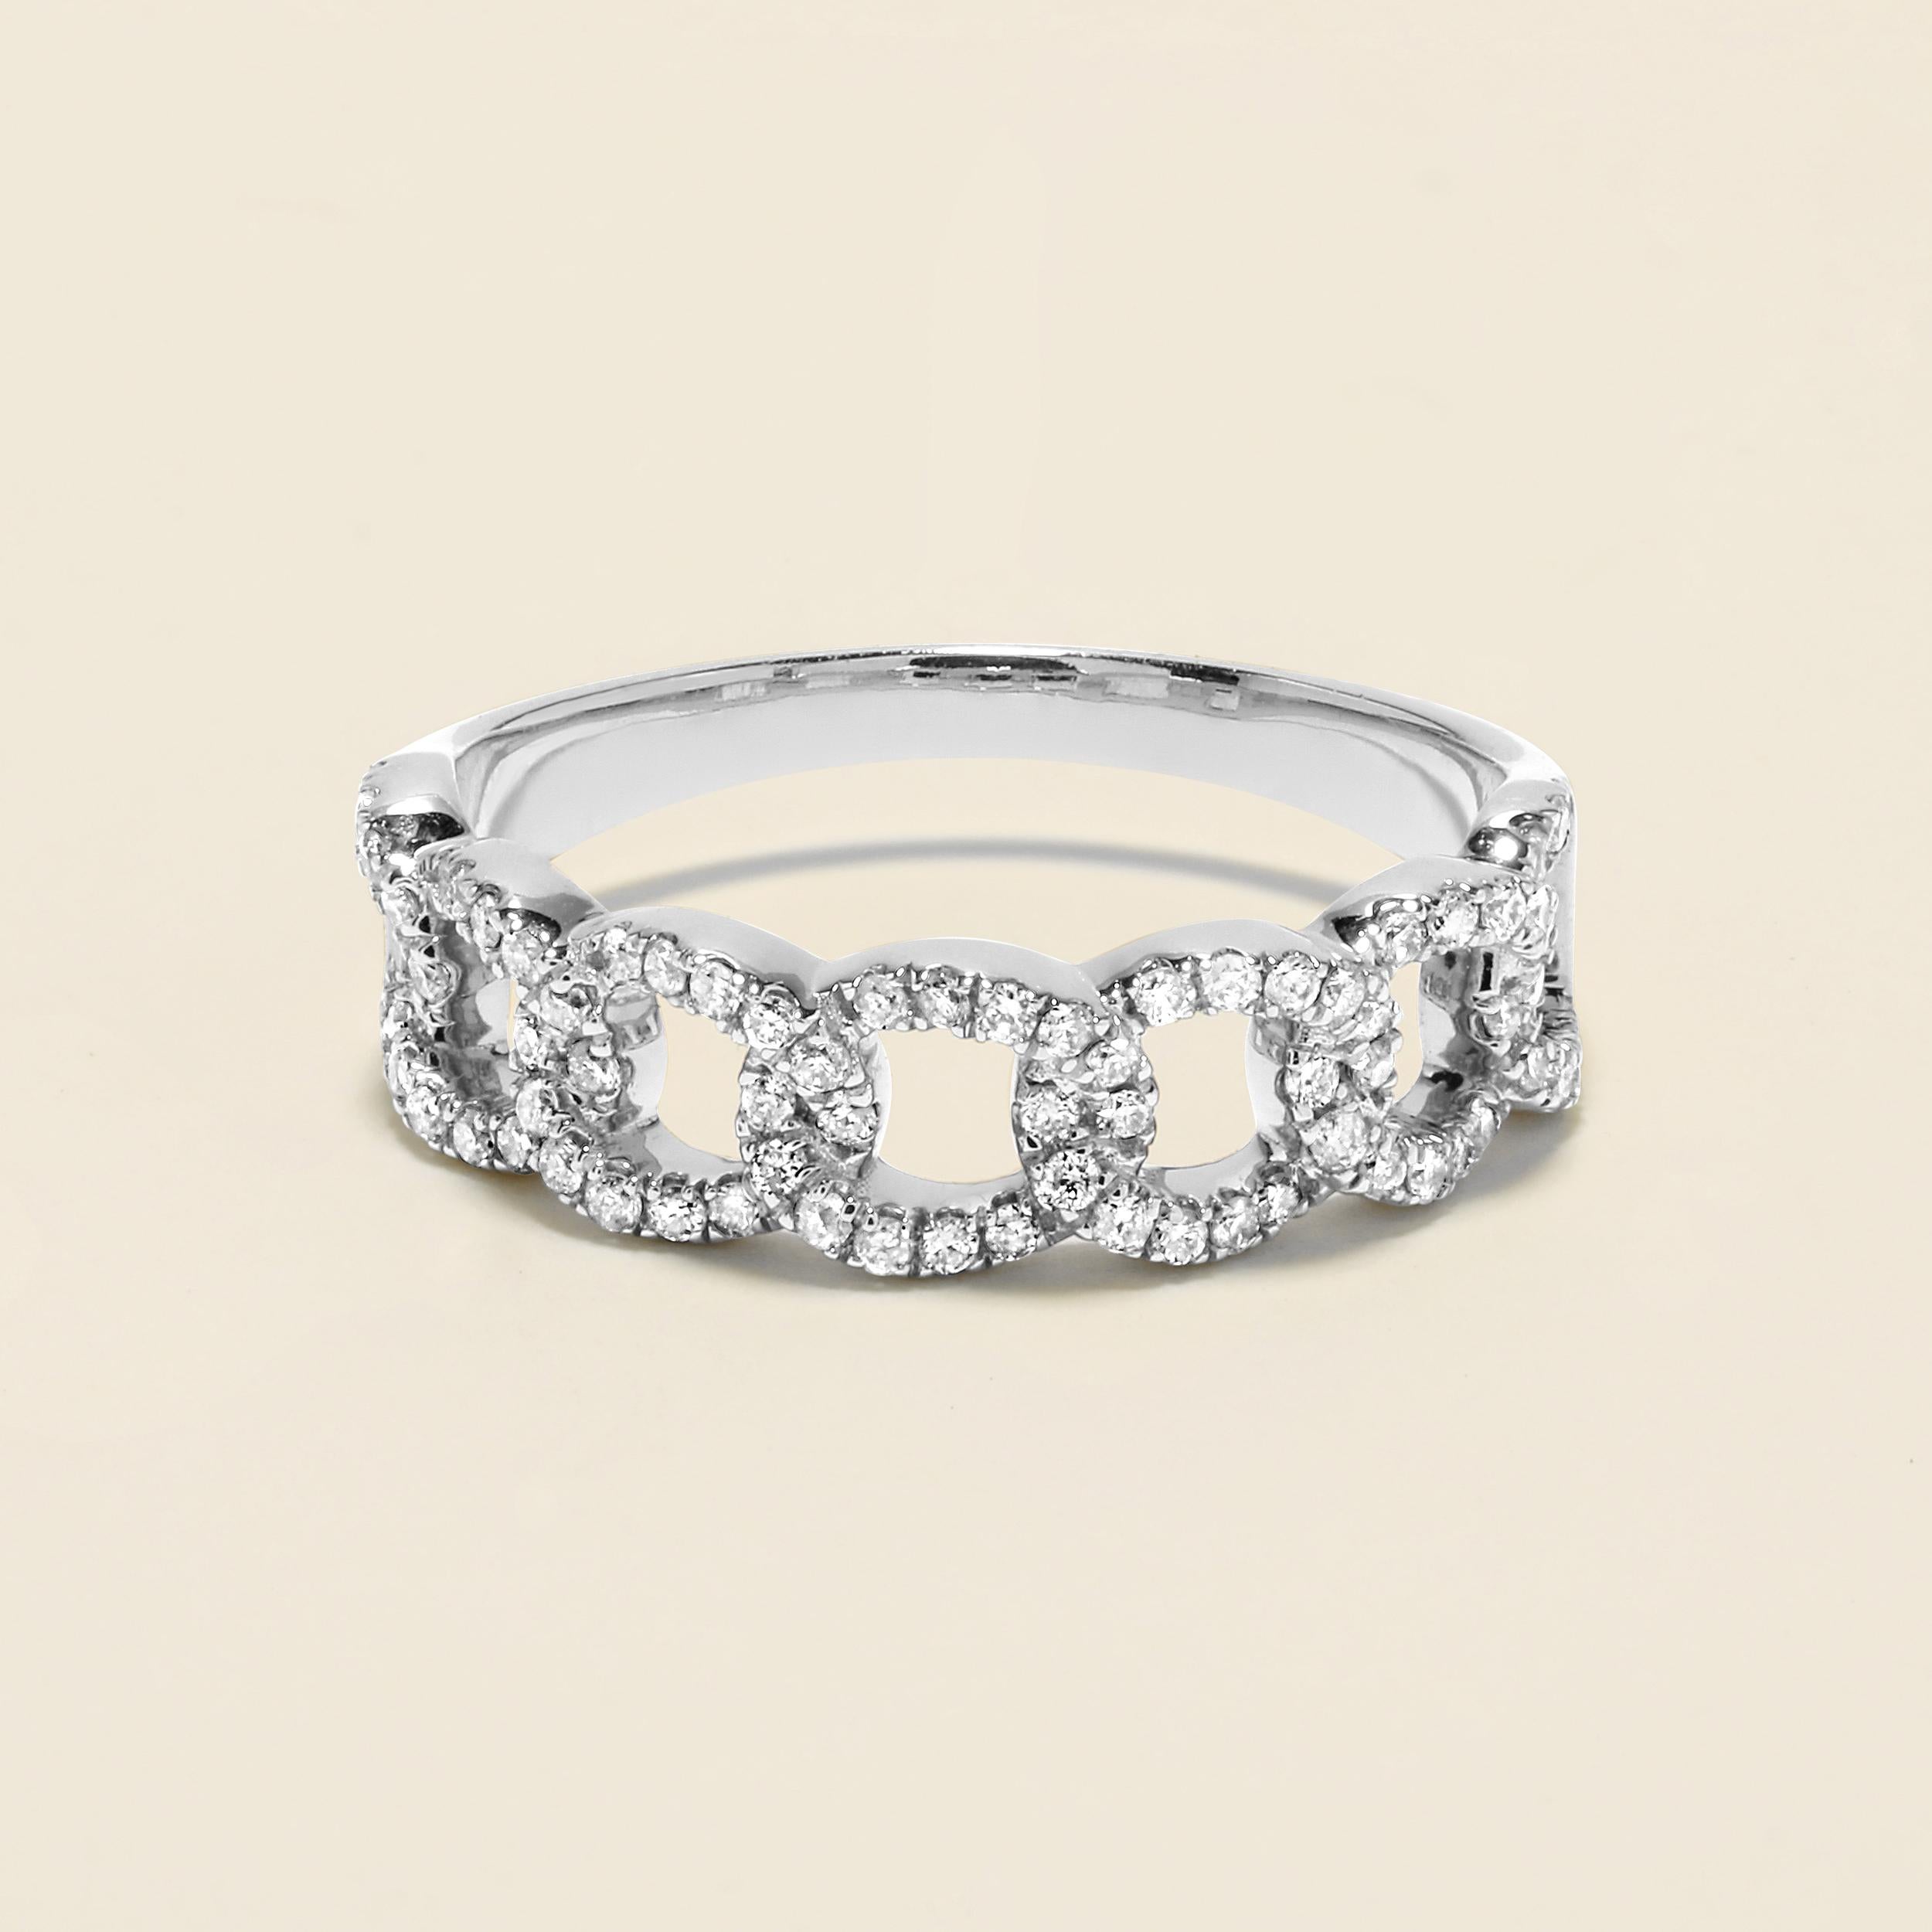 Ring Size: US 8

Crafted in 2.998 grams of 10K White Gold, the ring contains 76 stones of Round Natural Diamonds with a total of 0.375 carat in F-G color and I1-I2 clarity.

CONTEMPORARY AND TIMELESS ESSENCE: Crafted in 14-karat/18-karat with 100%